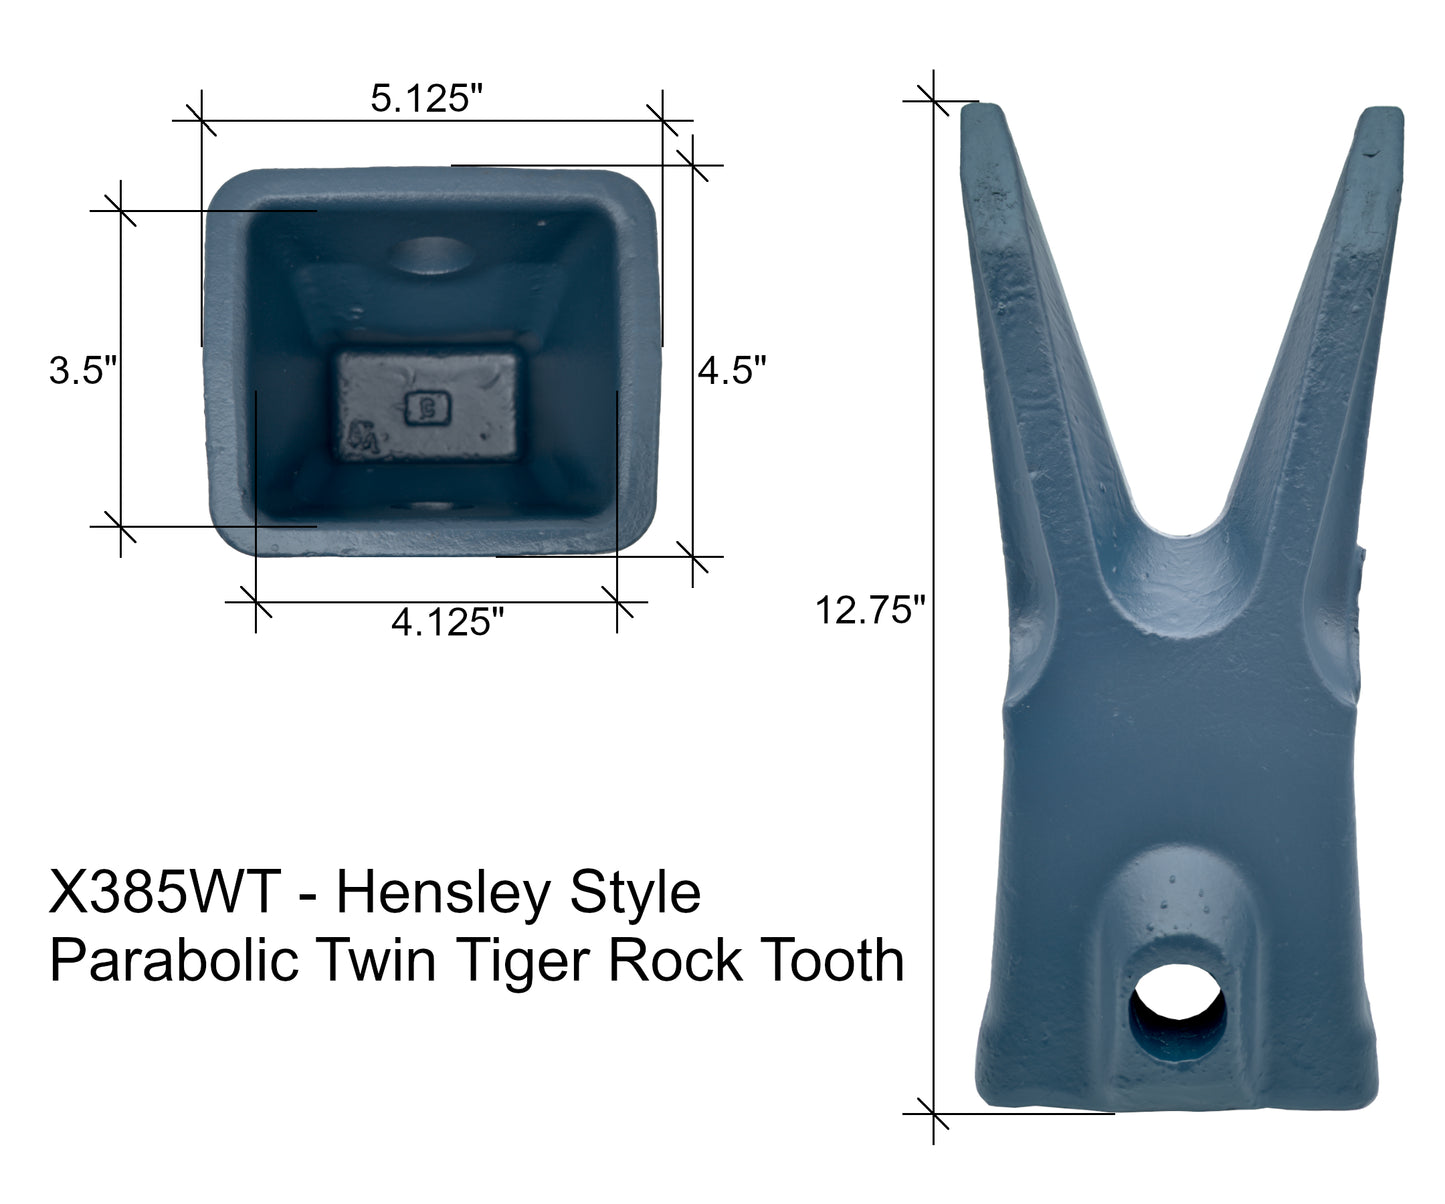 X385WT Twin Tiger Rock Tooth - 'Hensley X385 Style' for Excavator Buckets